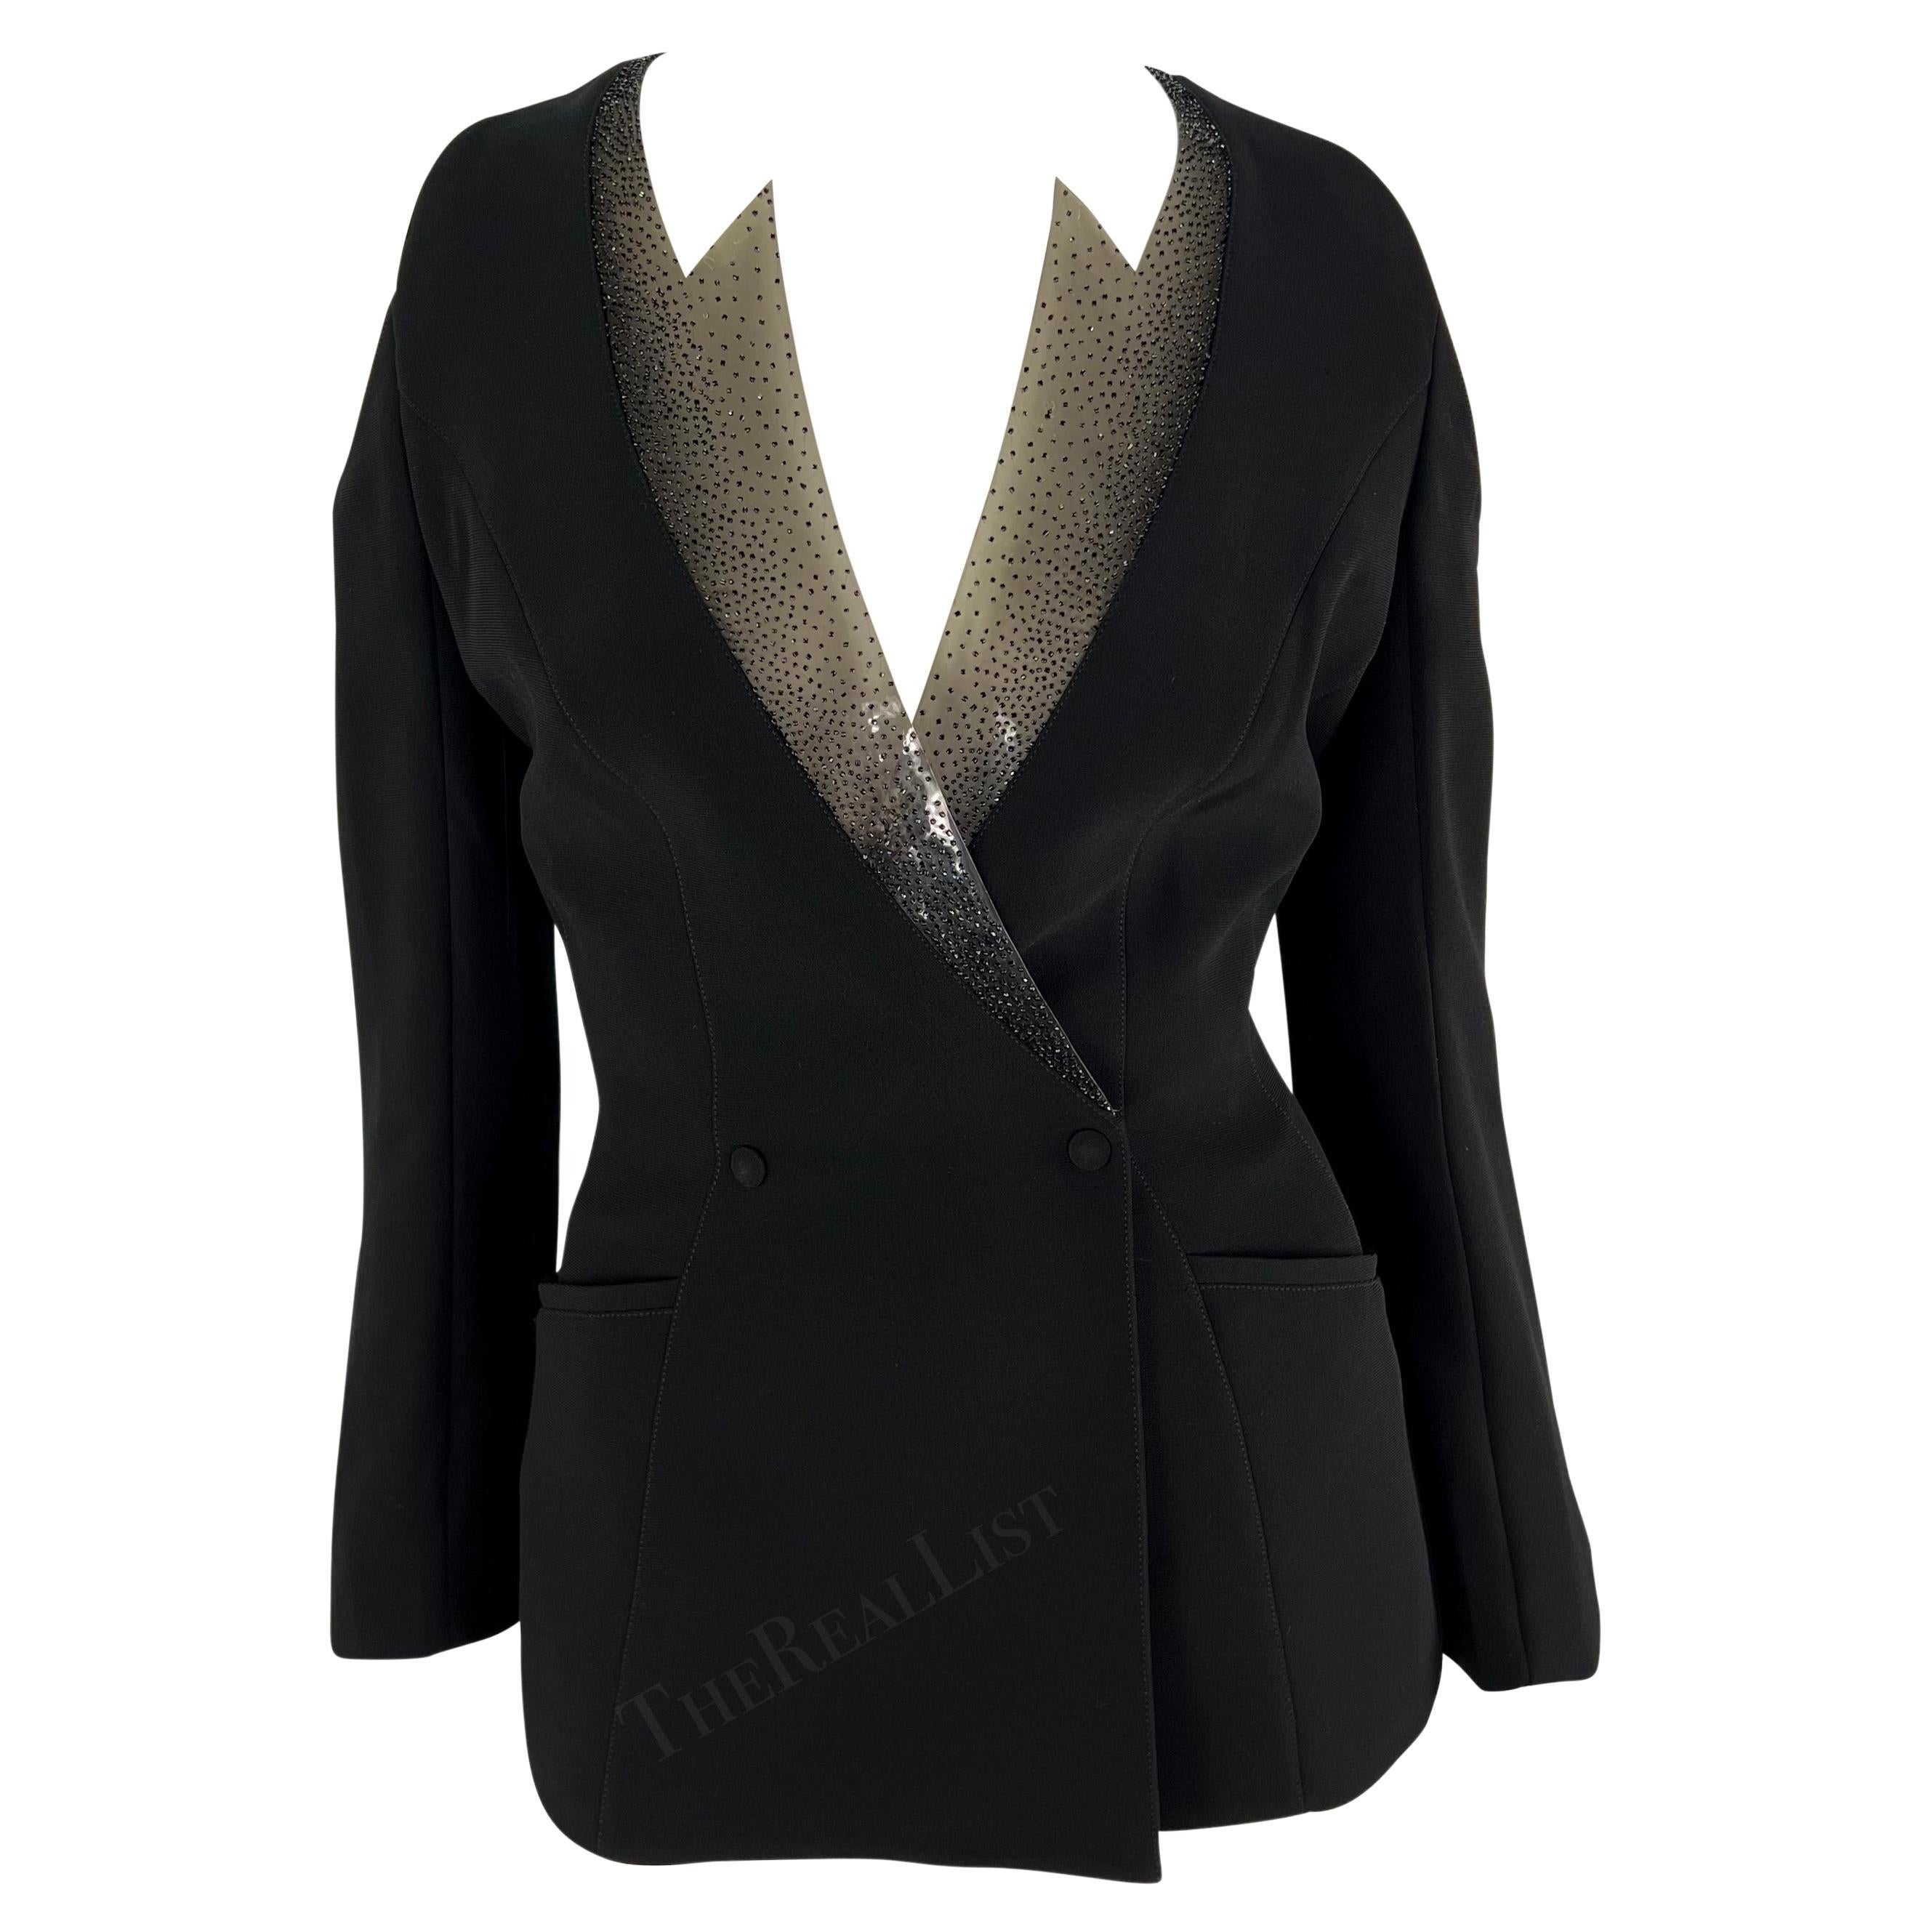 S/S 2001 Thierry Mugler Runway Beaded PVC Cutout Black Plunging Blazer For Sale